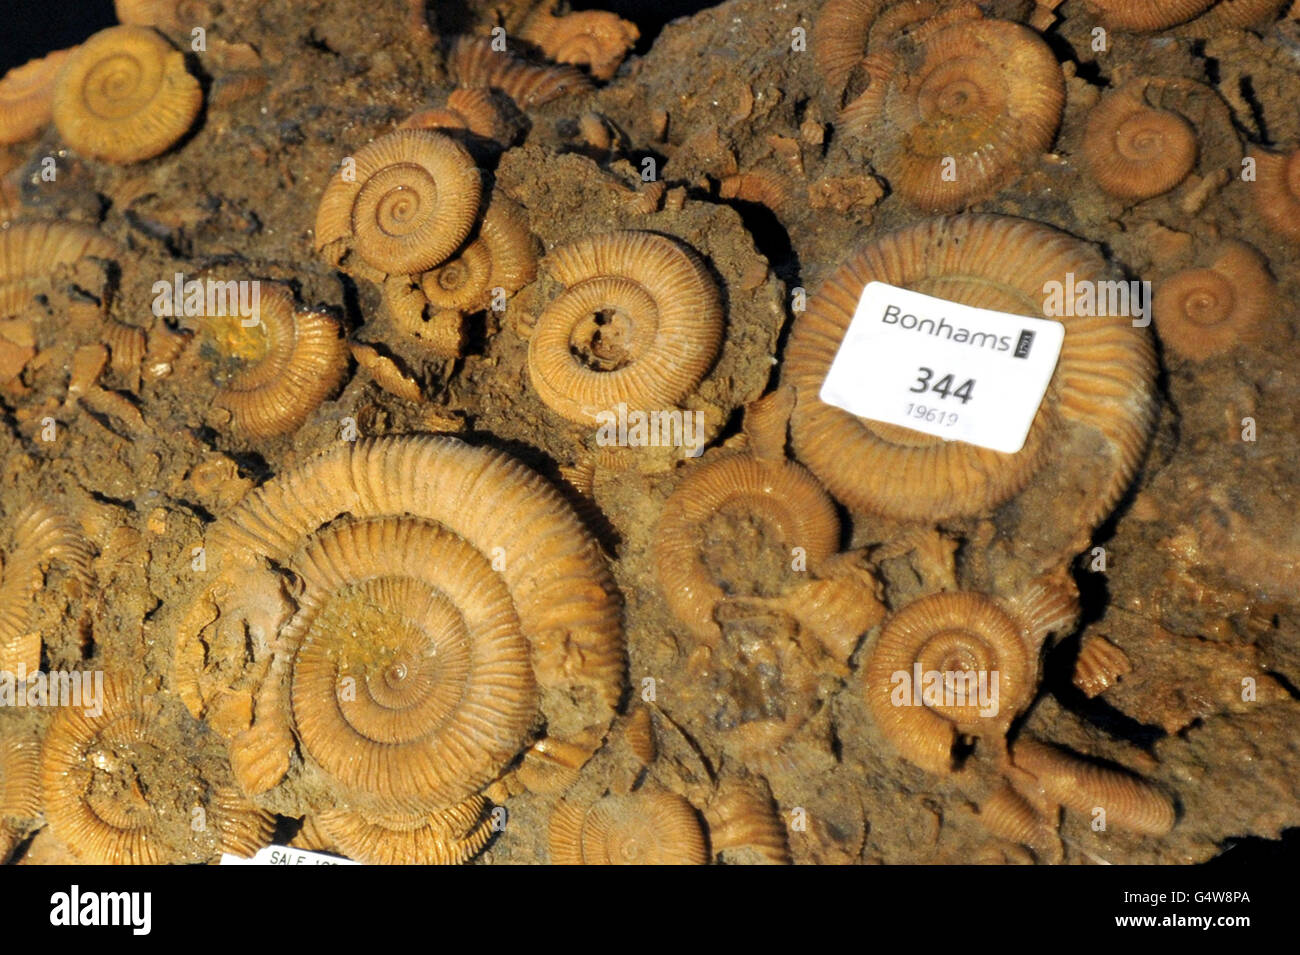 A rare Devonian period (450 million year old) Ammonite fossil, found in Morocco, which forms part of a Bonham's Annual Gentleman's Library sale, on Wednesday January 18th. Stock Photo